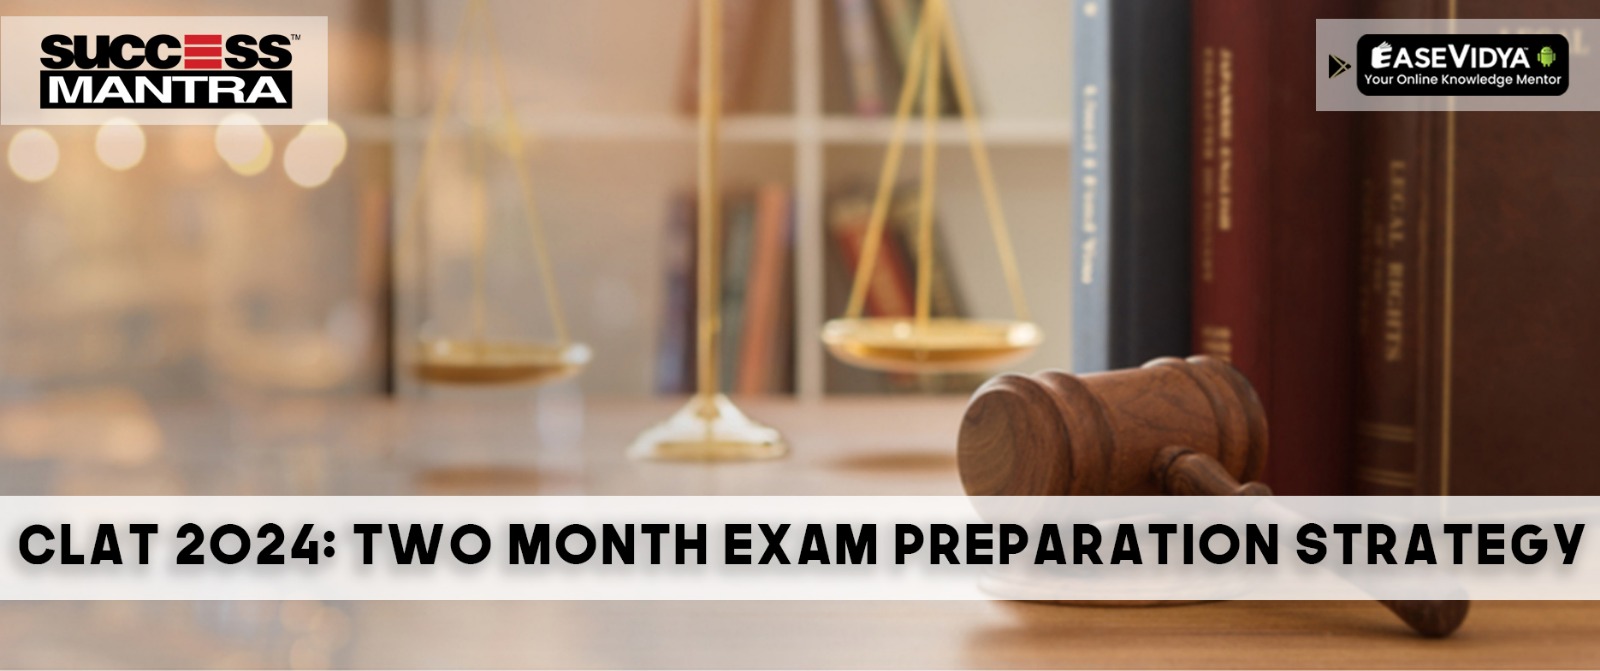  CLAT UG 2024: Two-Month Exam Preparation Strategy